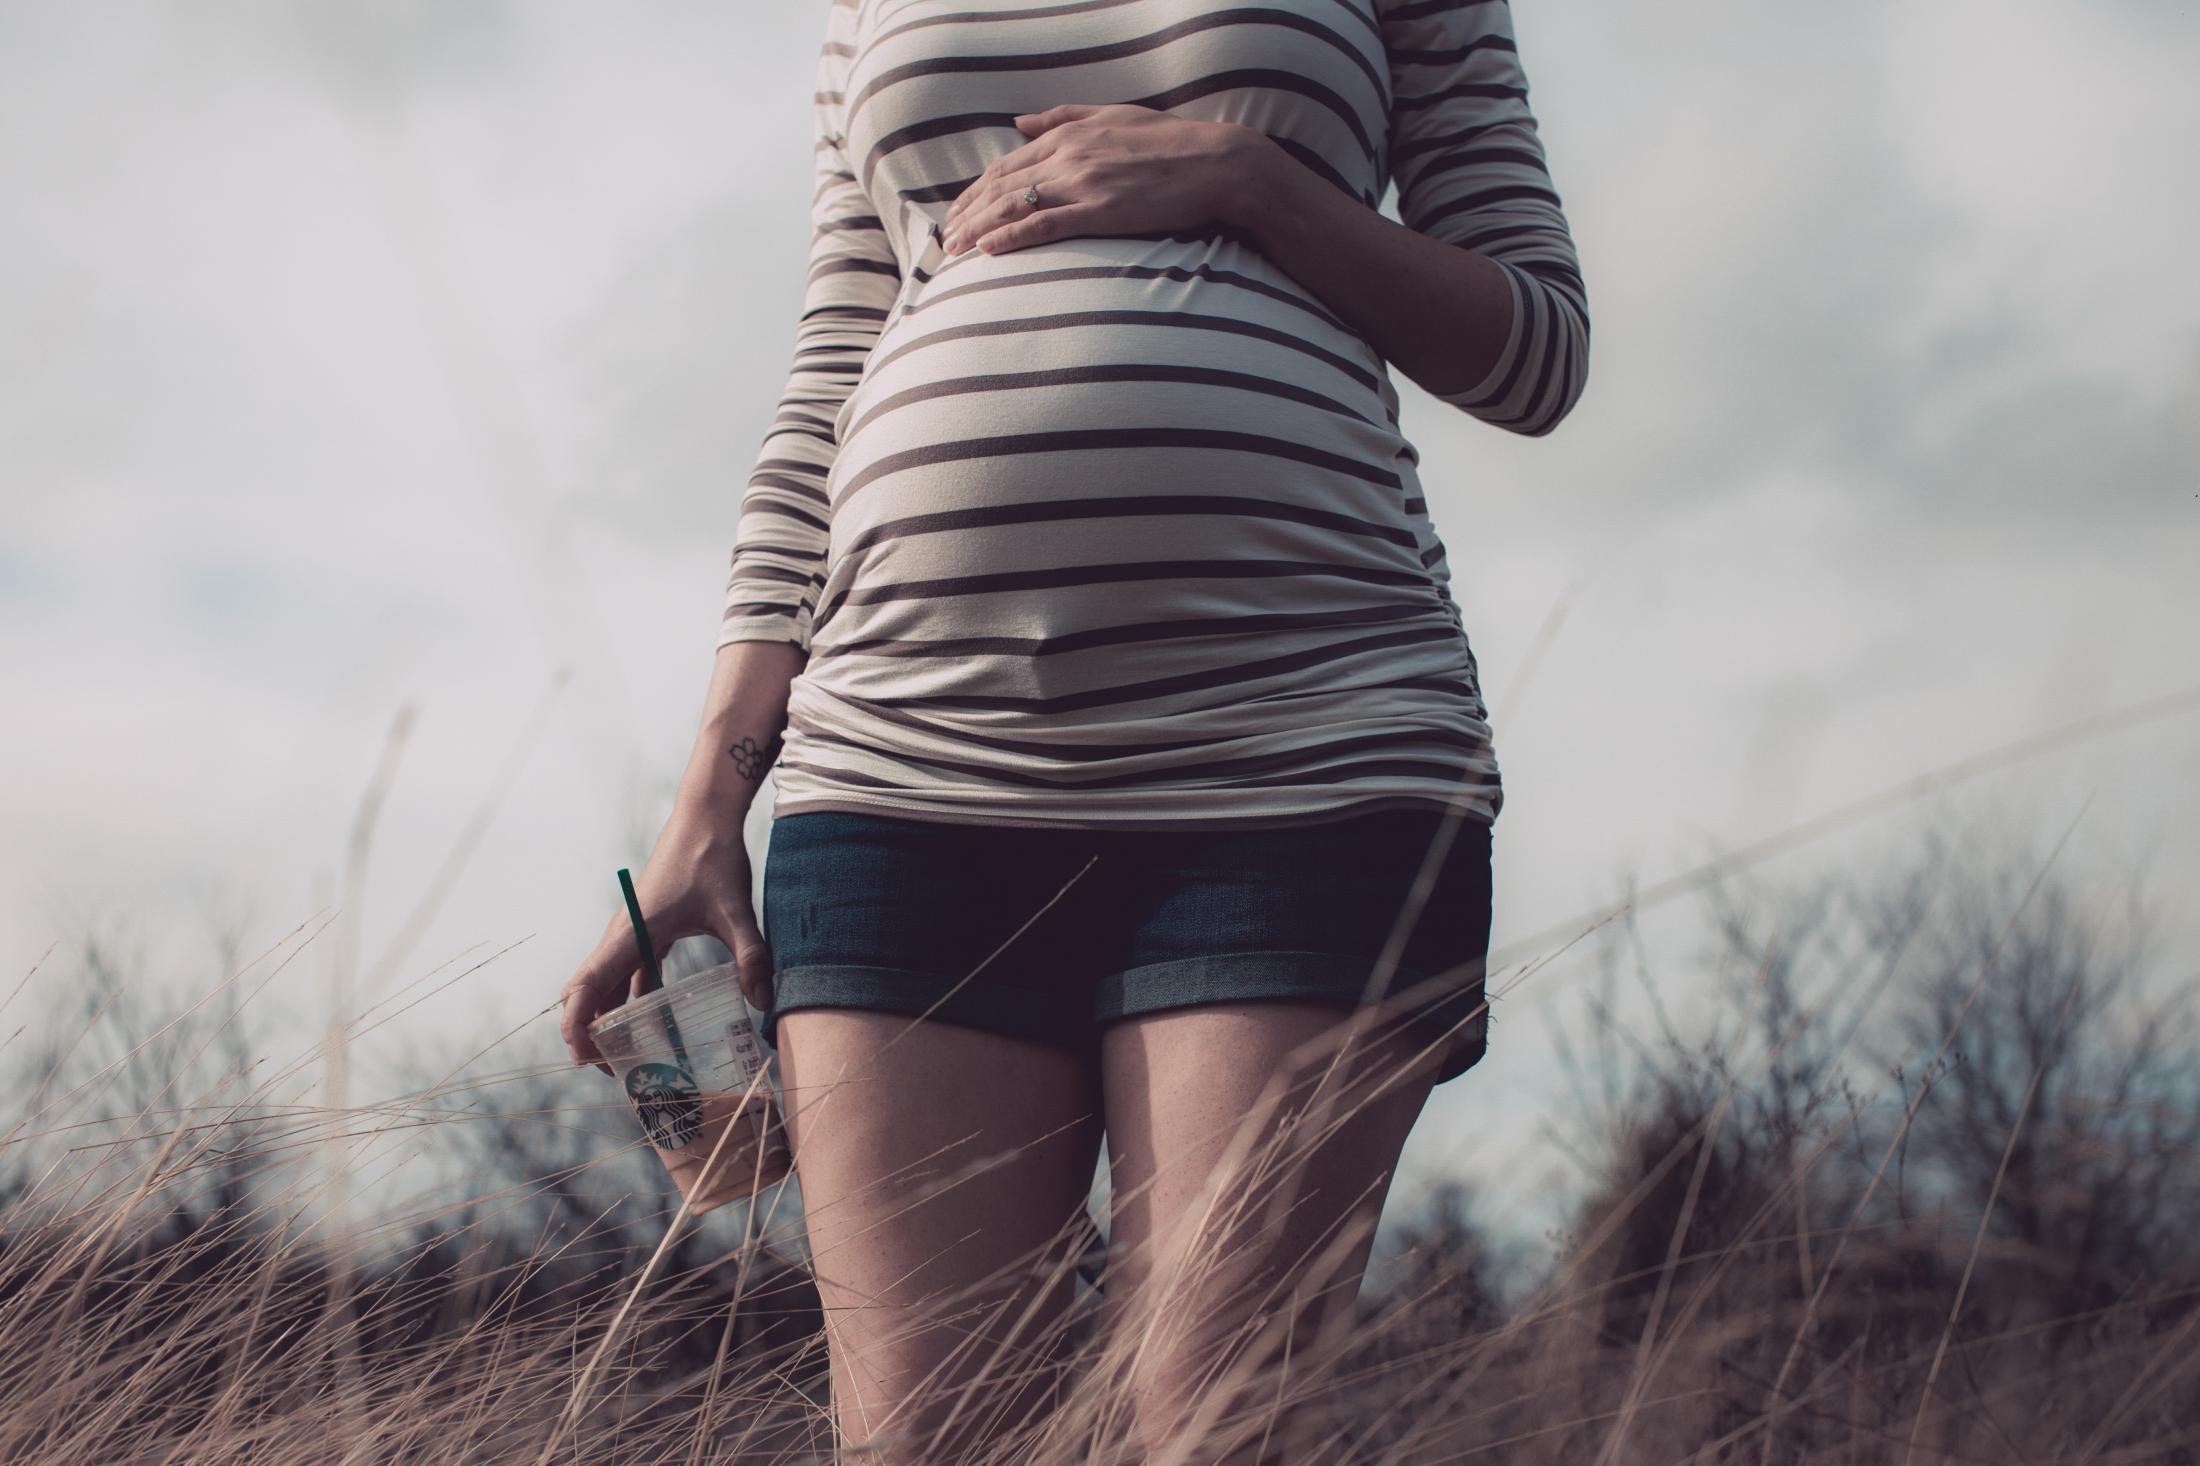 Eight months pregnant, Courtney holds a coffee in her hand during a morning walk in the country.